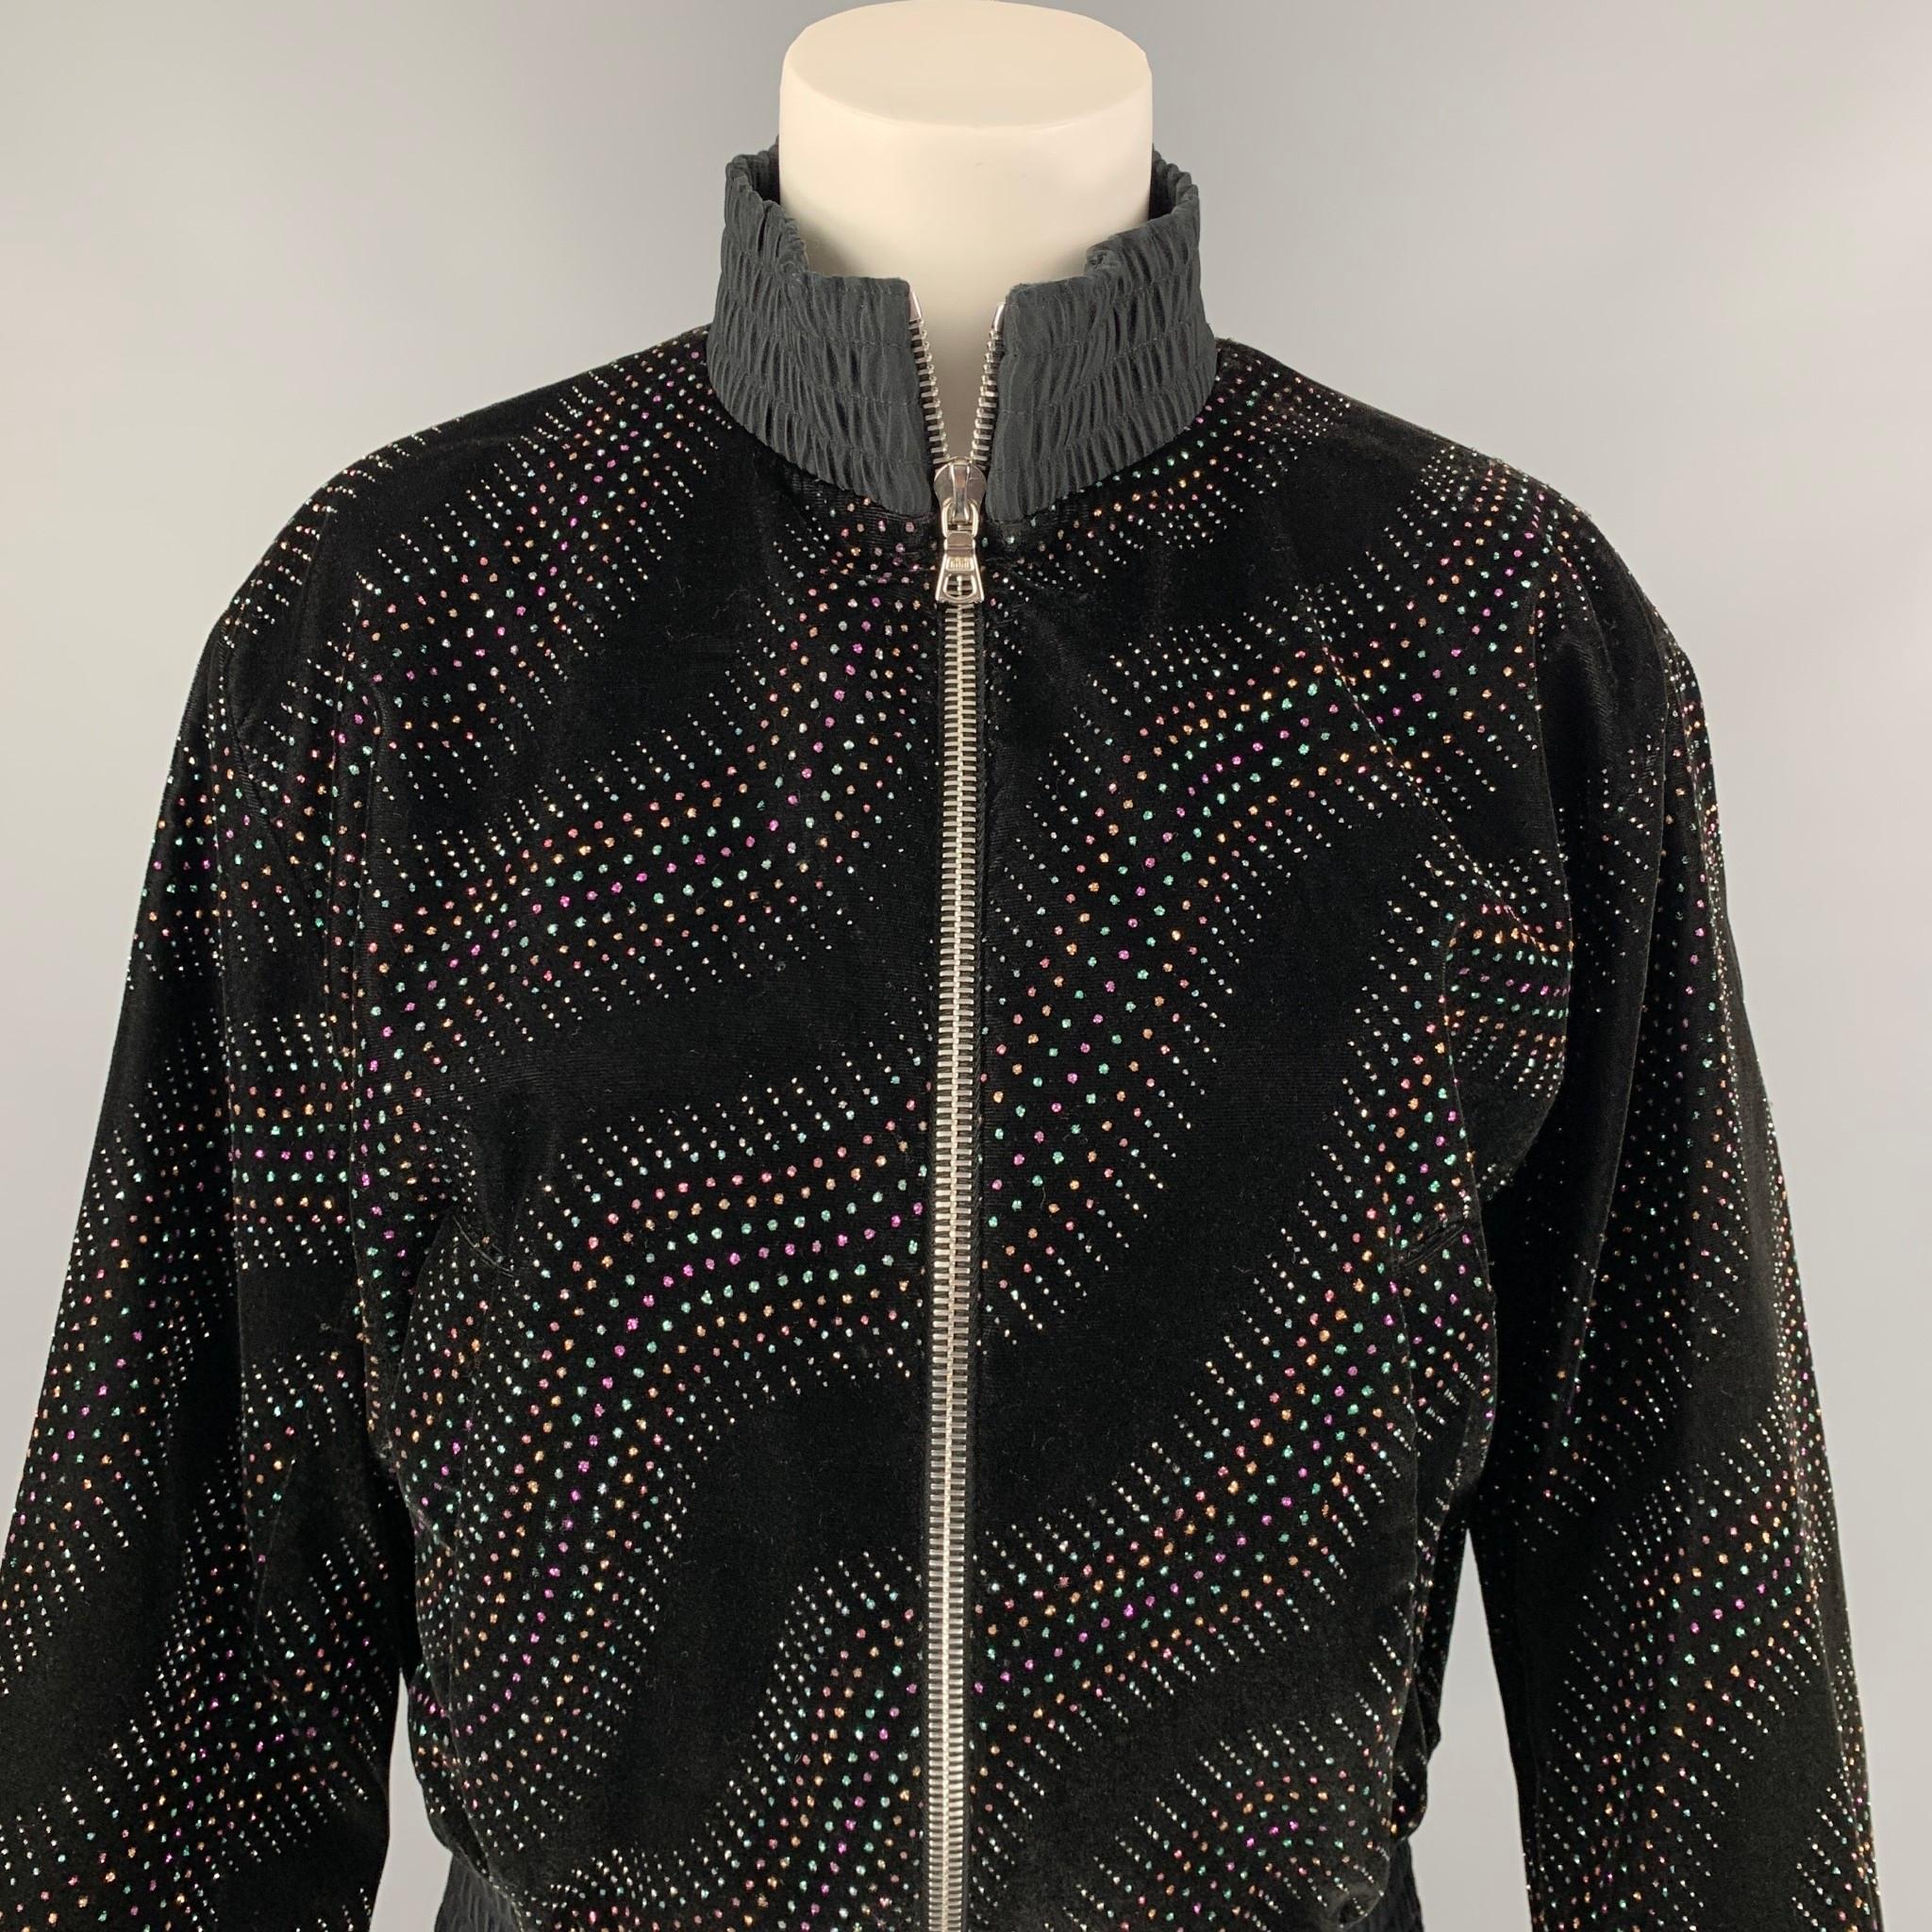 MARC JACOBS jacket comes in a black acetate blend featuring rhinestone details throughout, ribbed hem, high collar, and a zip up closure. Made in USA. 

Very Good Pre-Owned Condition.
Marked: 2

Measurements:

Shoulder: 17 in.
Bust: 40 in.
Sleeve: